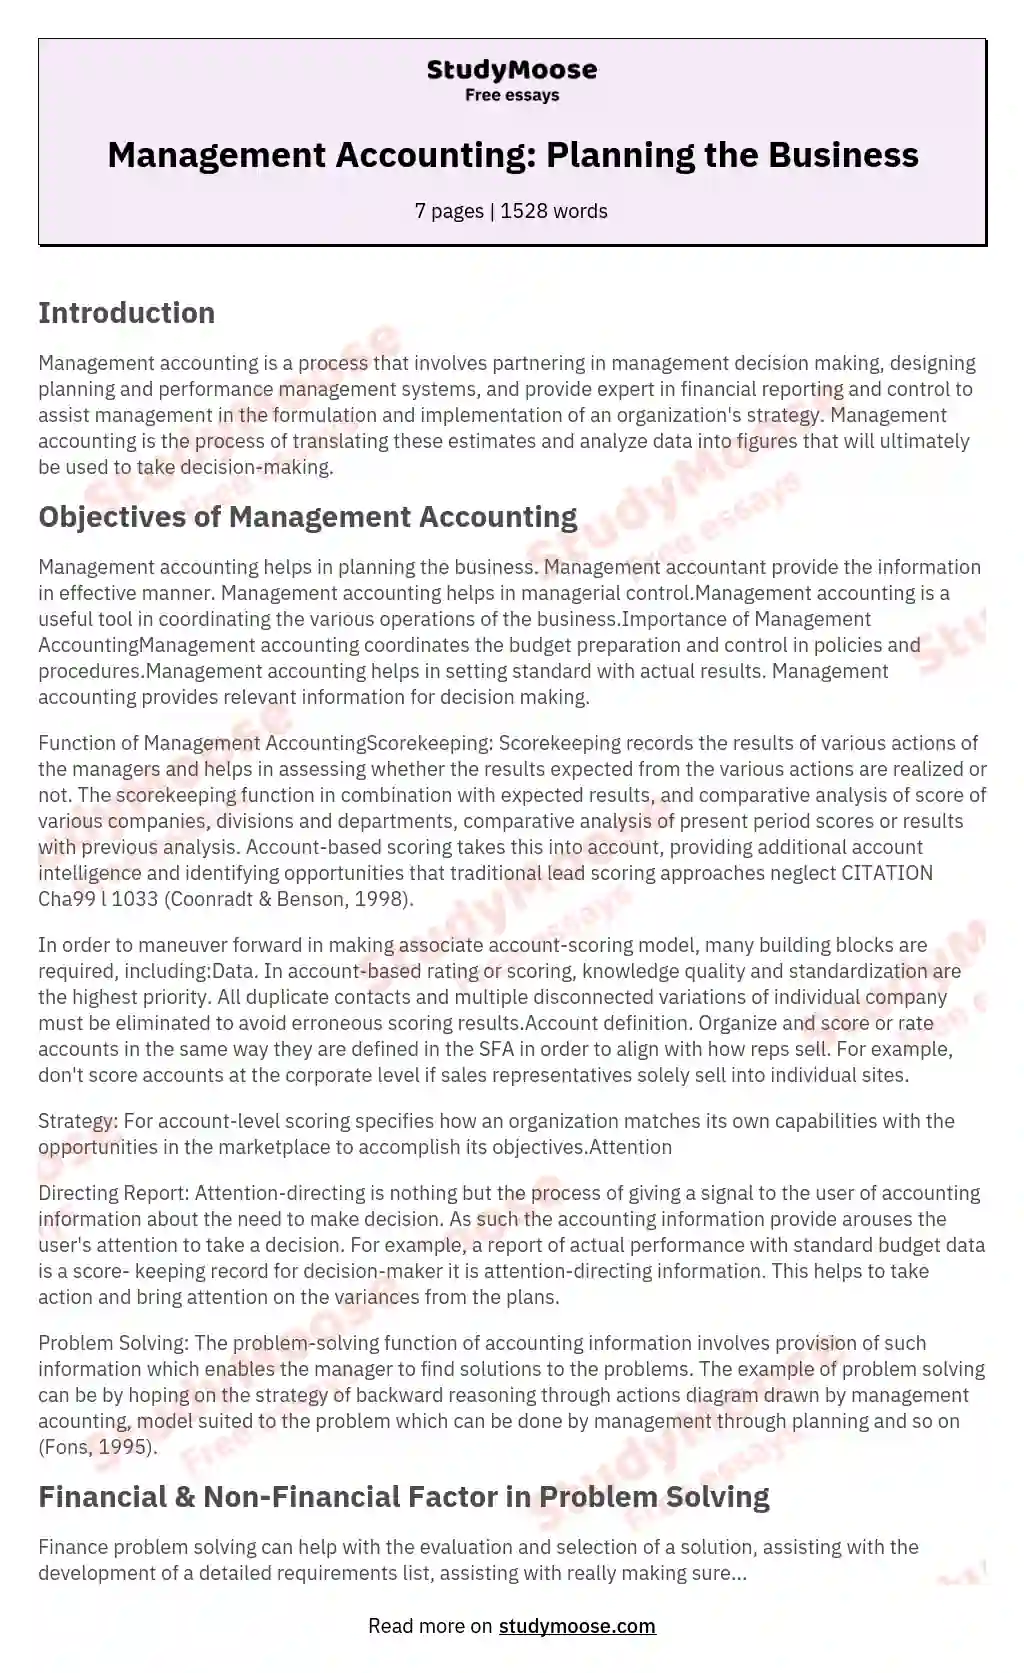 Management Accounting: Planning the Business essay